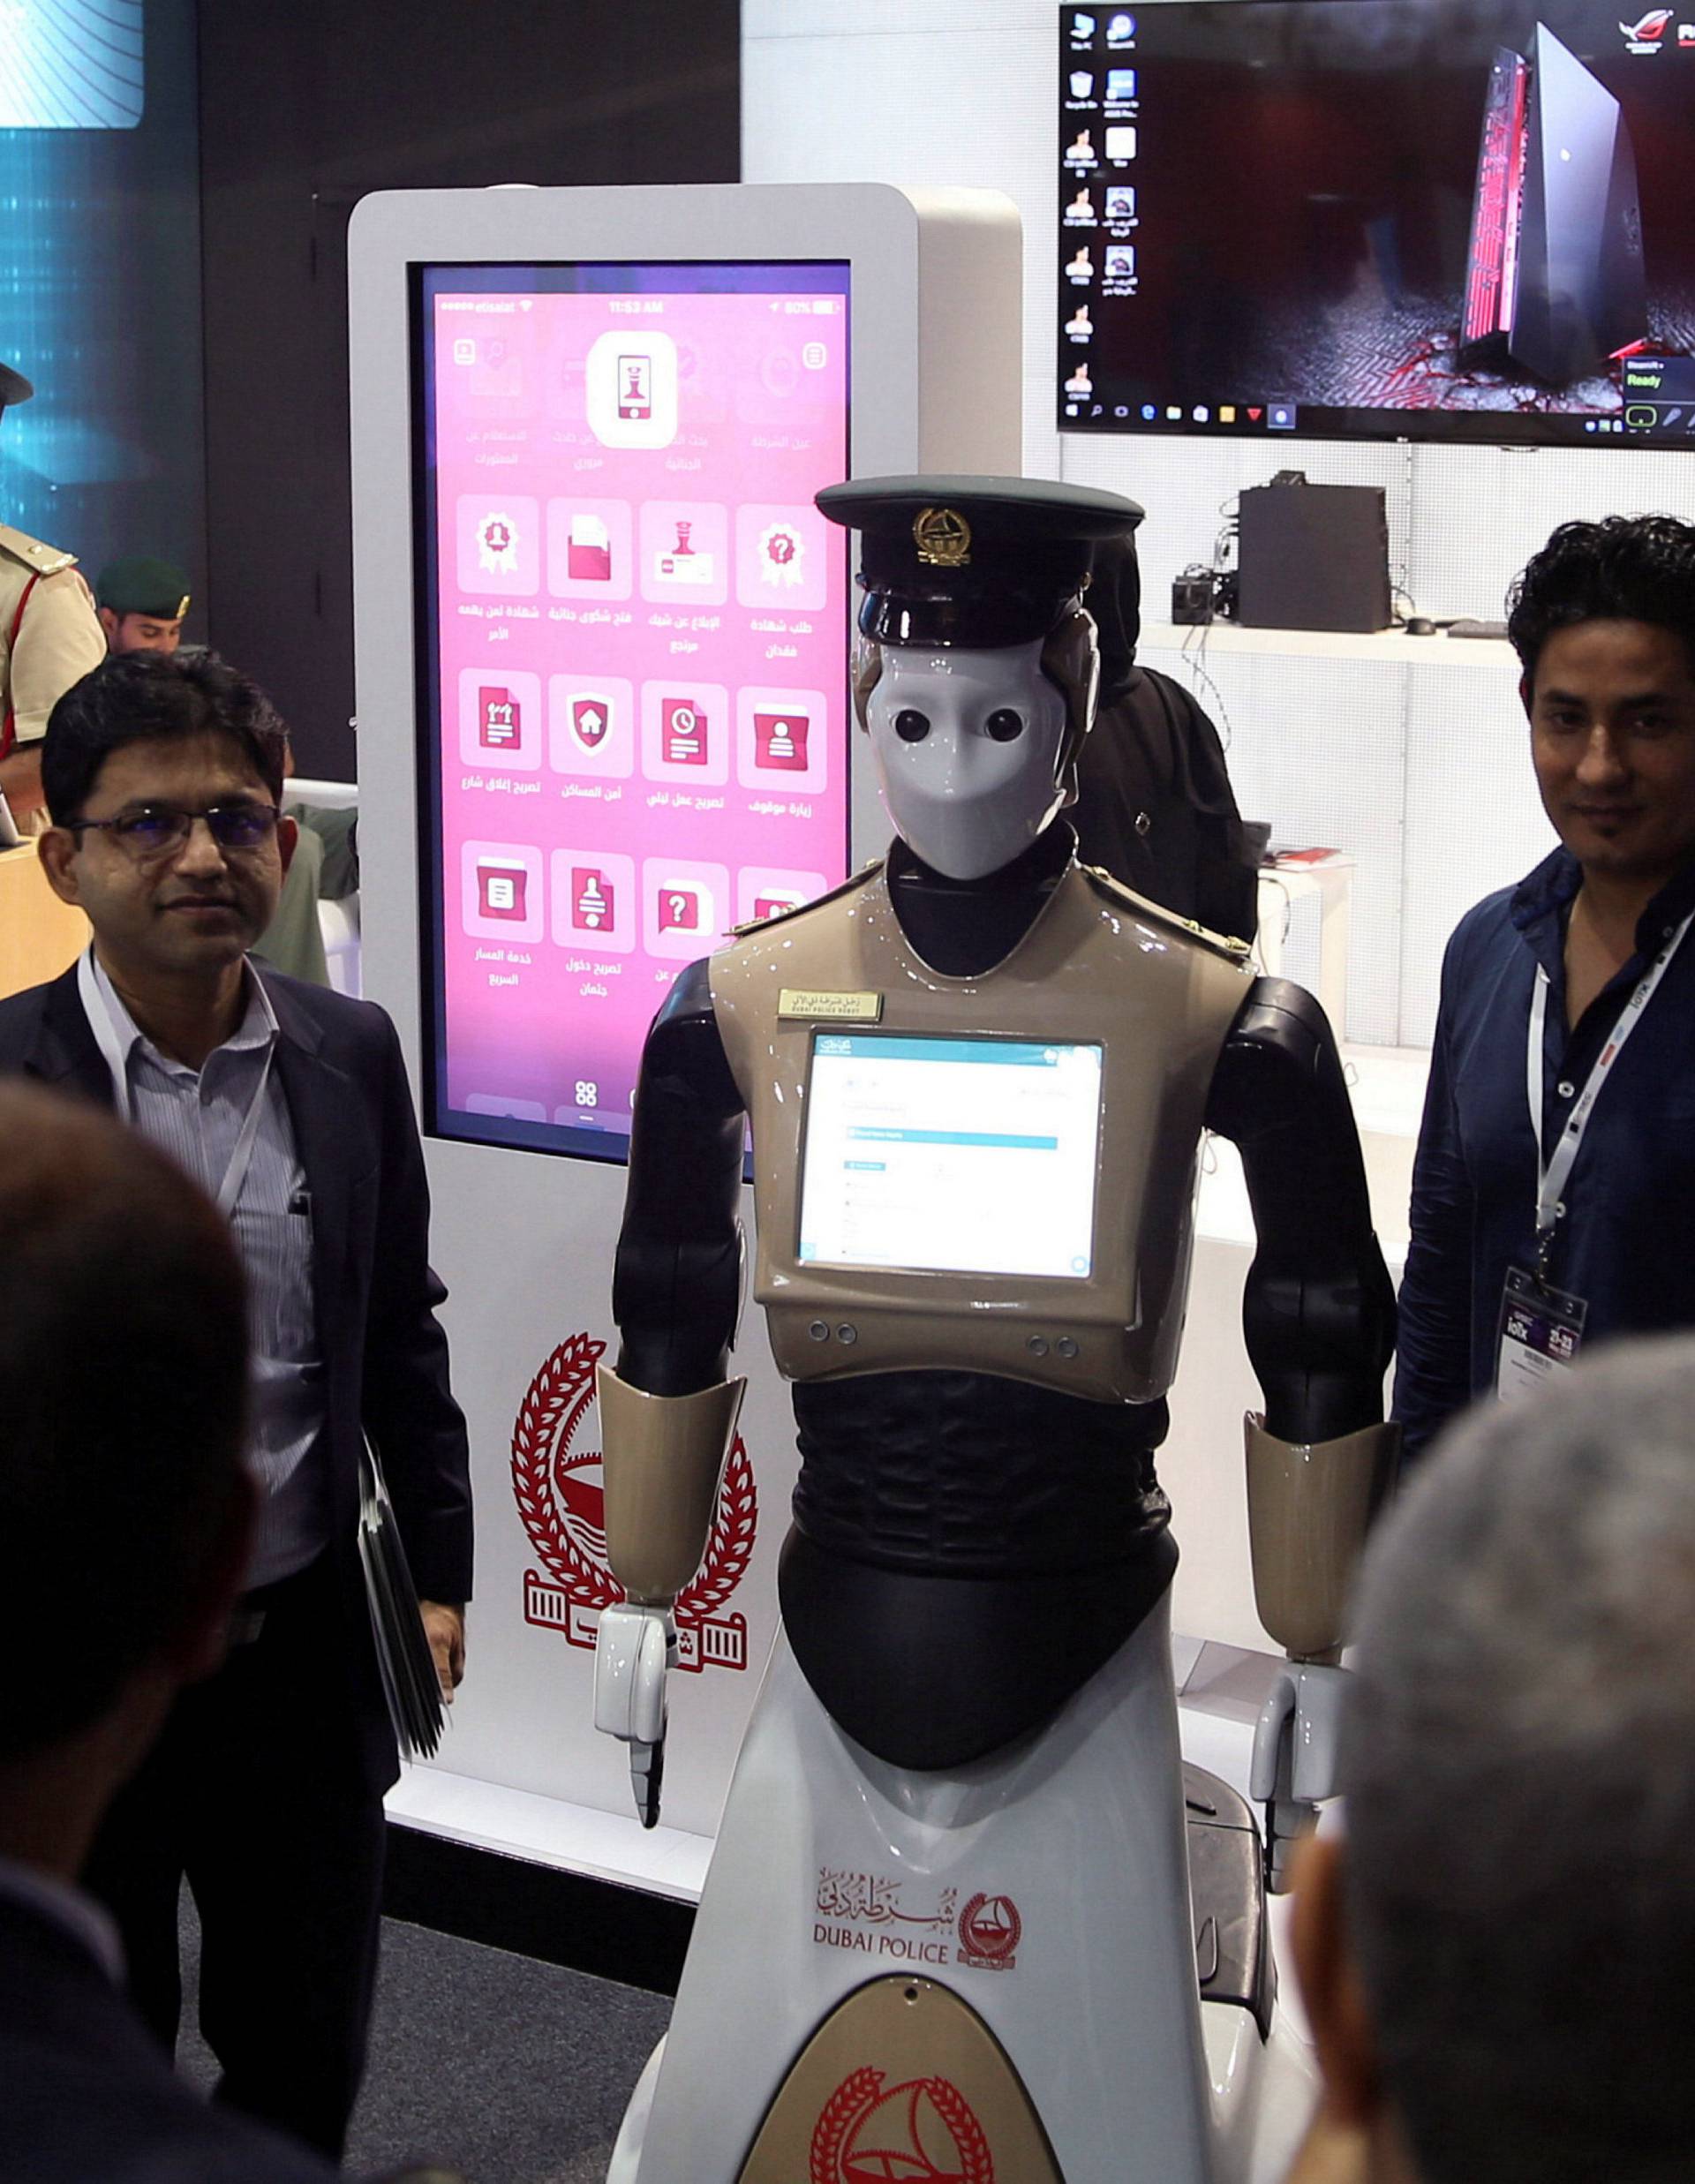 Visitors stand around an operational robot policeman at the opening of the 4th Gulf Information Security Expo and Conference (GISEC) in Dubai